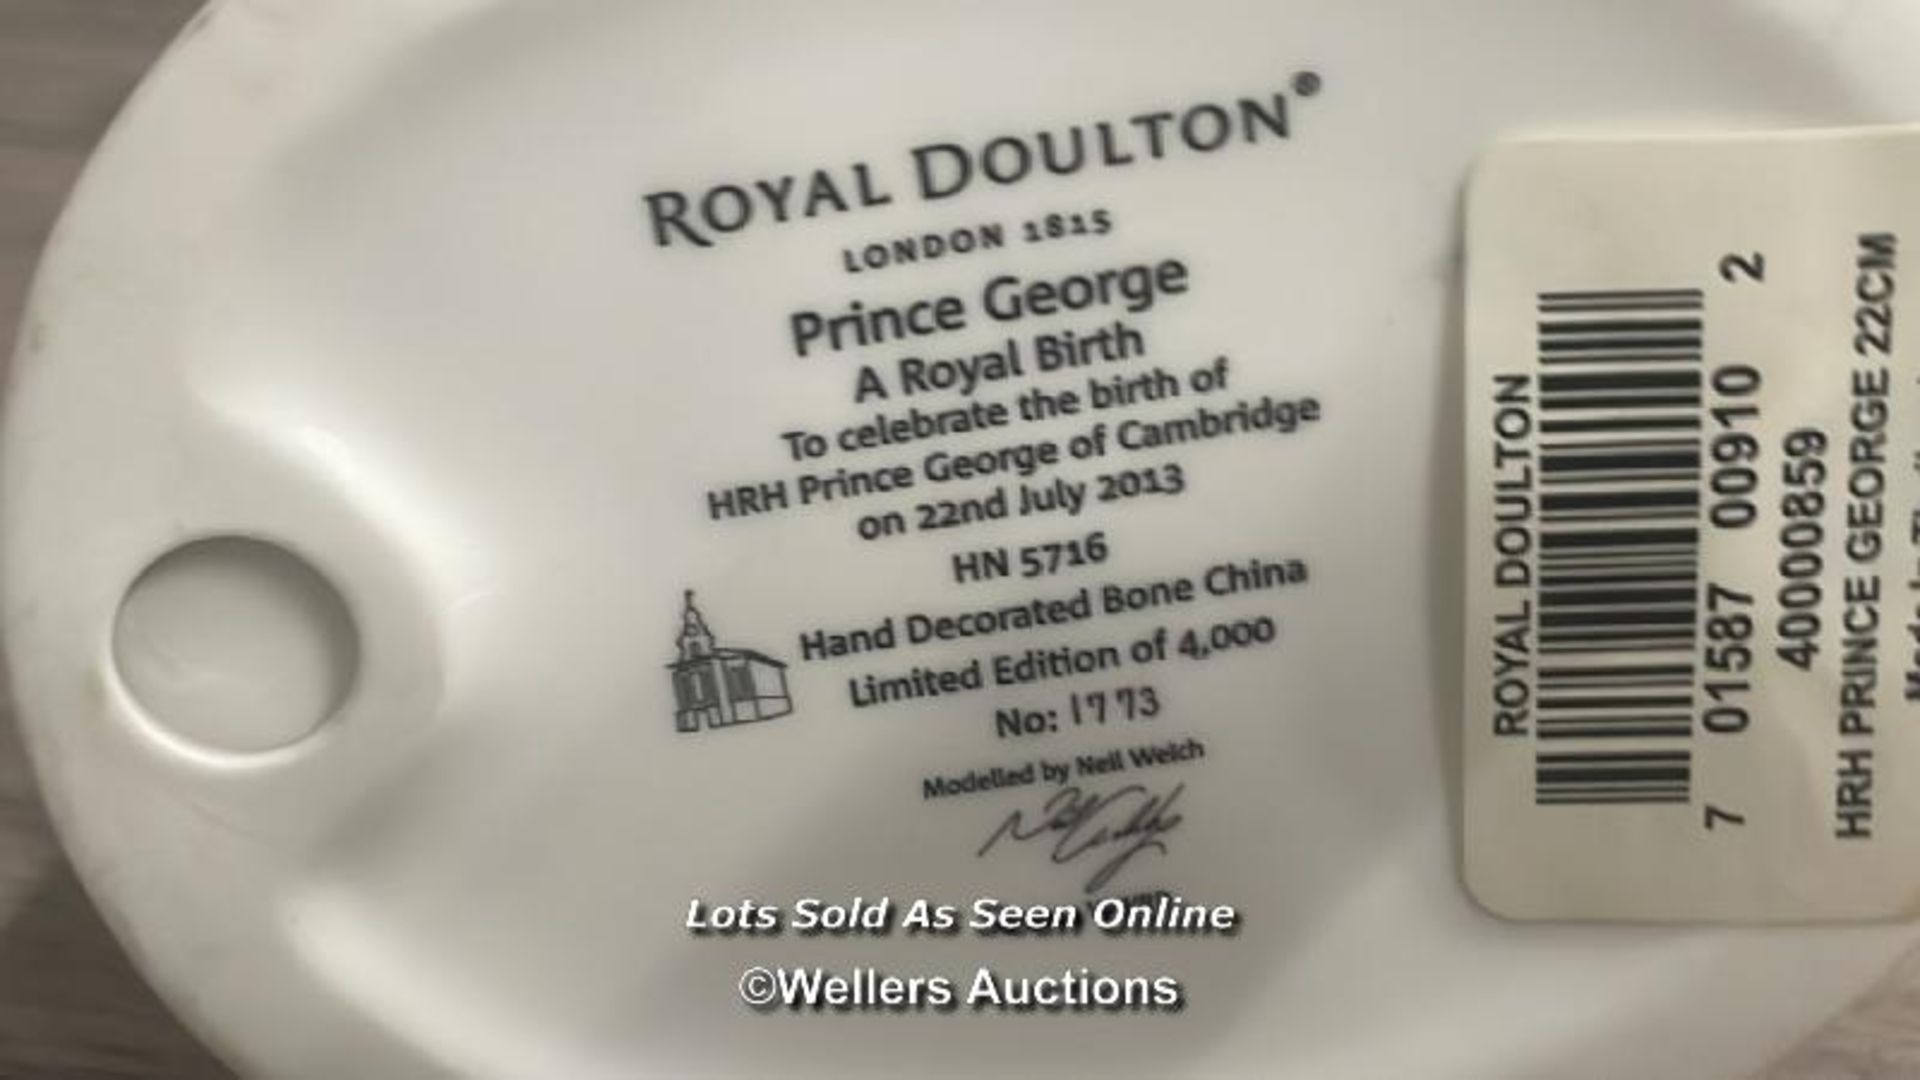 ROYAL DOULTON FIGURINE "PRINCE GEORGE A ROYAL BIRTH" AND ROYAL WORCESTER "DIANA PRINCESS OF WALES" - Image 3 of 5